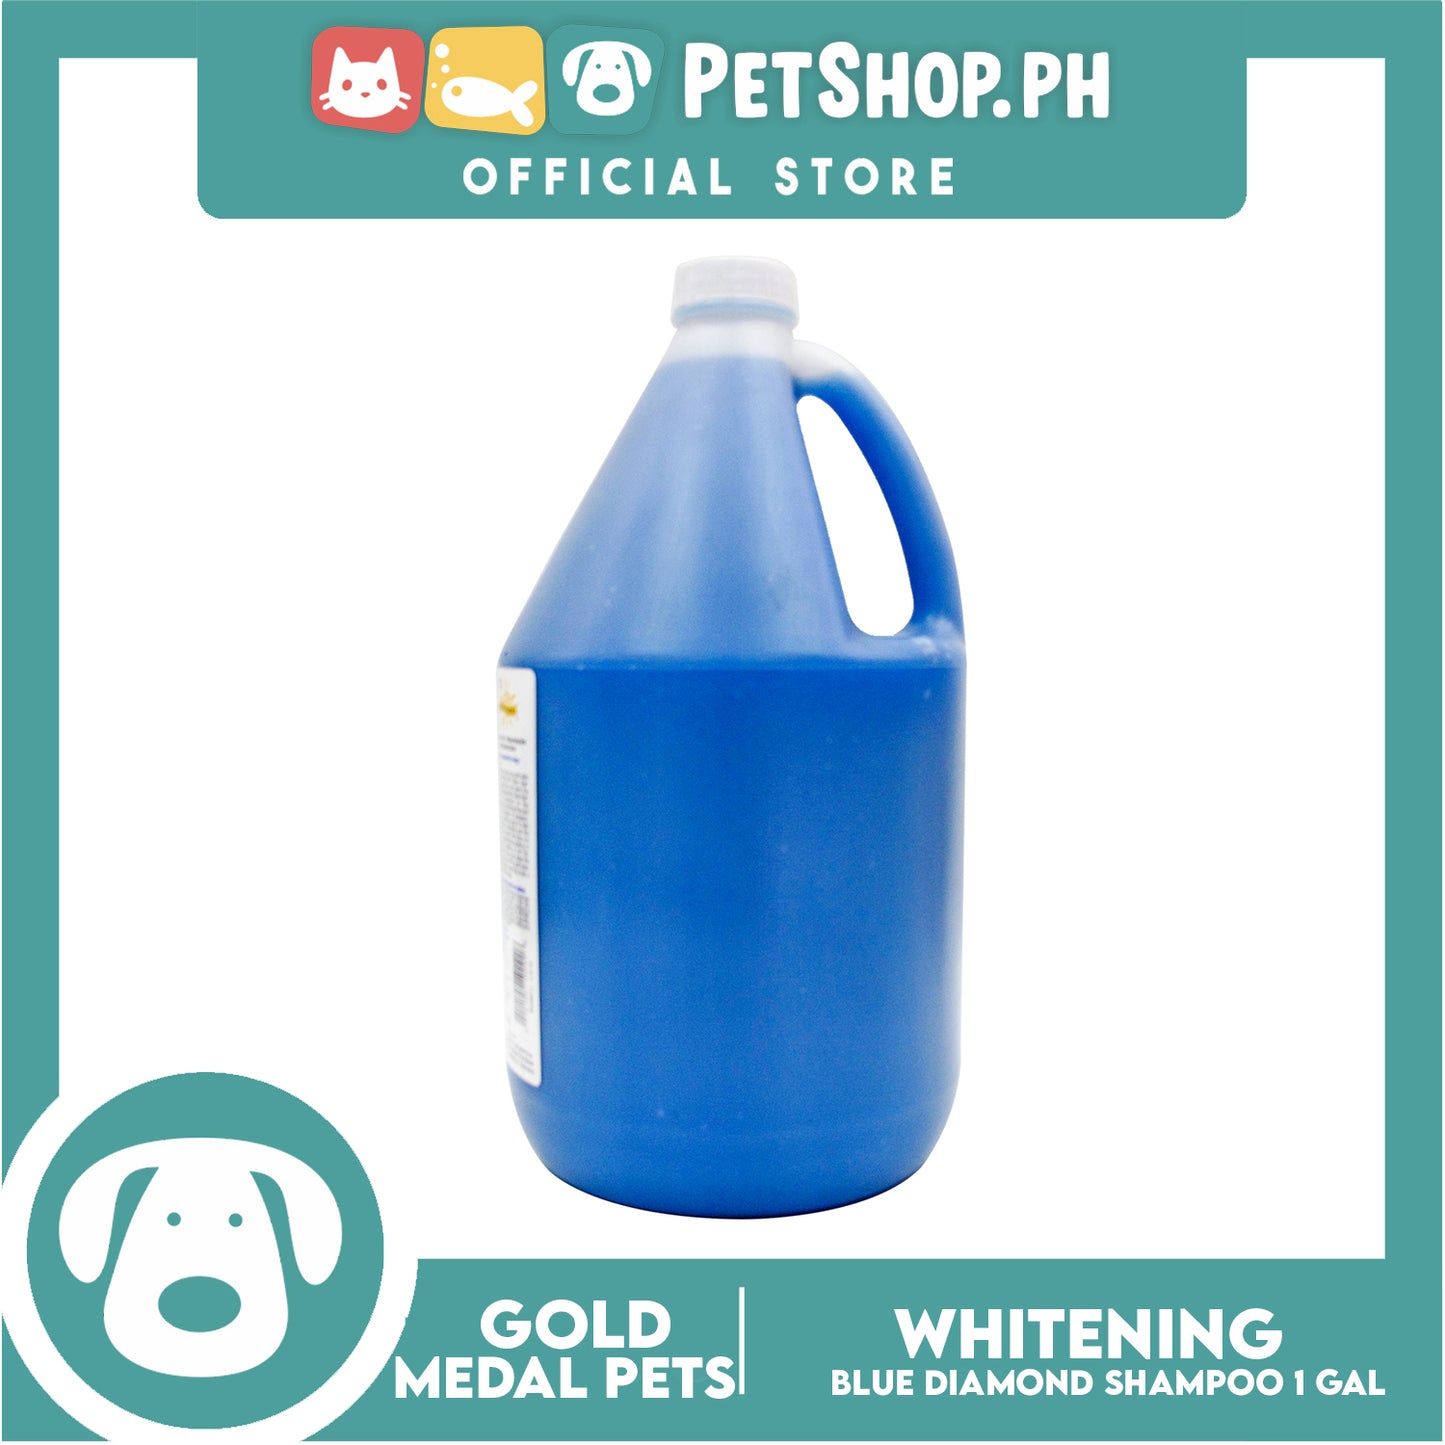 Gold Medal Pets Whitening Blue Diamond Shampoo 1 Gallon For Cats and Dogs